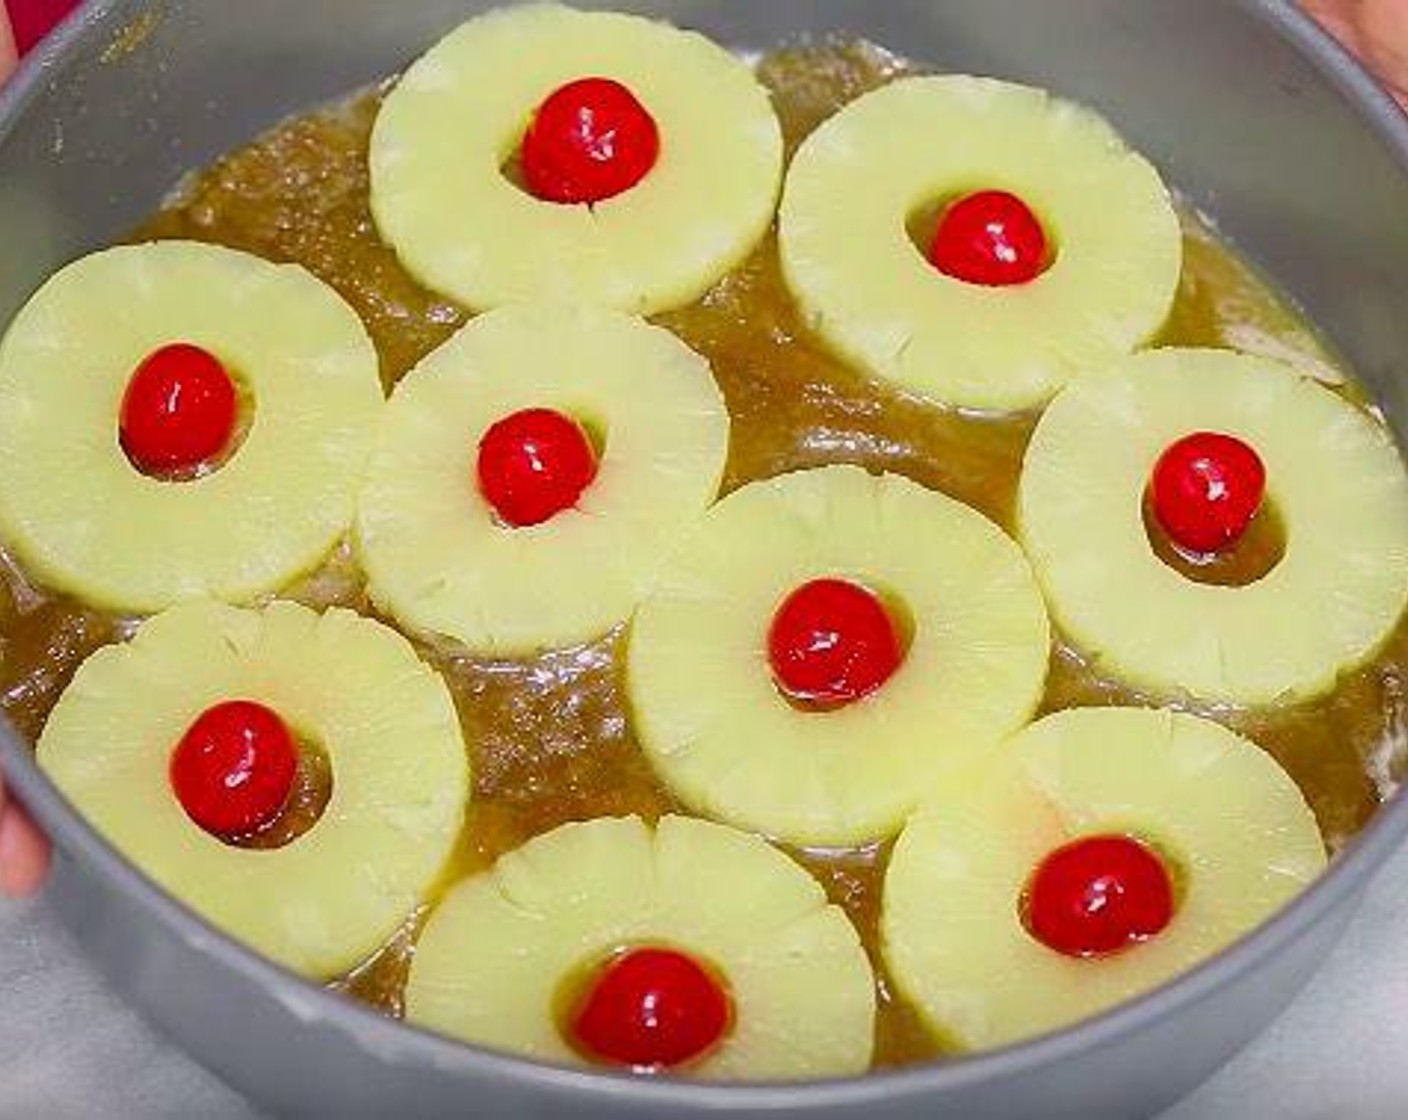 step 2 Place Butter (1/4 cup) into a 9 inch (deep dish) round cake pan. Make sure it is a deep pan. Sprinkle with Brown Sugar (1/2 cup). Top with Canned Pineapple Slices in Juice (8 slices) and arrange Maraschino Cherries (8) inside the pineapple hole. Set aside.